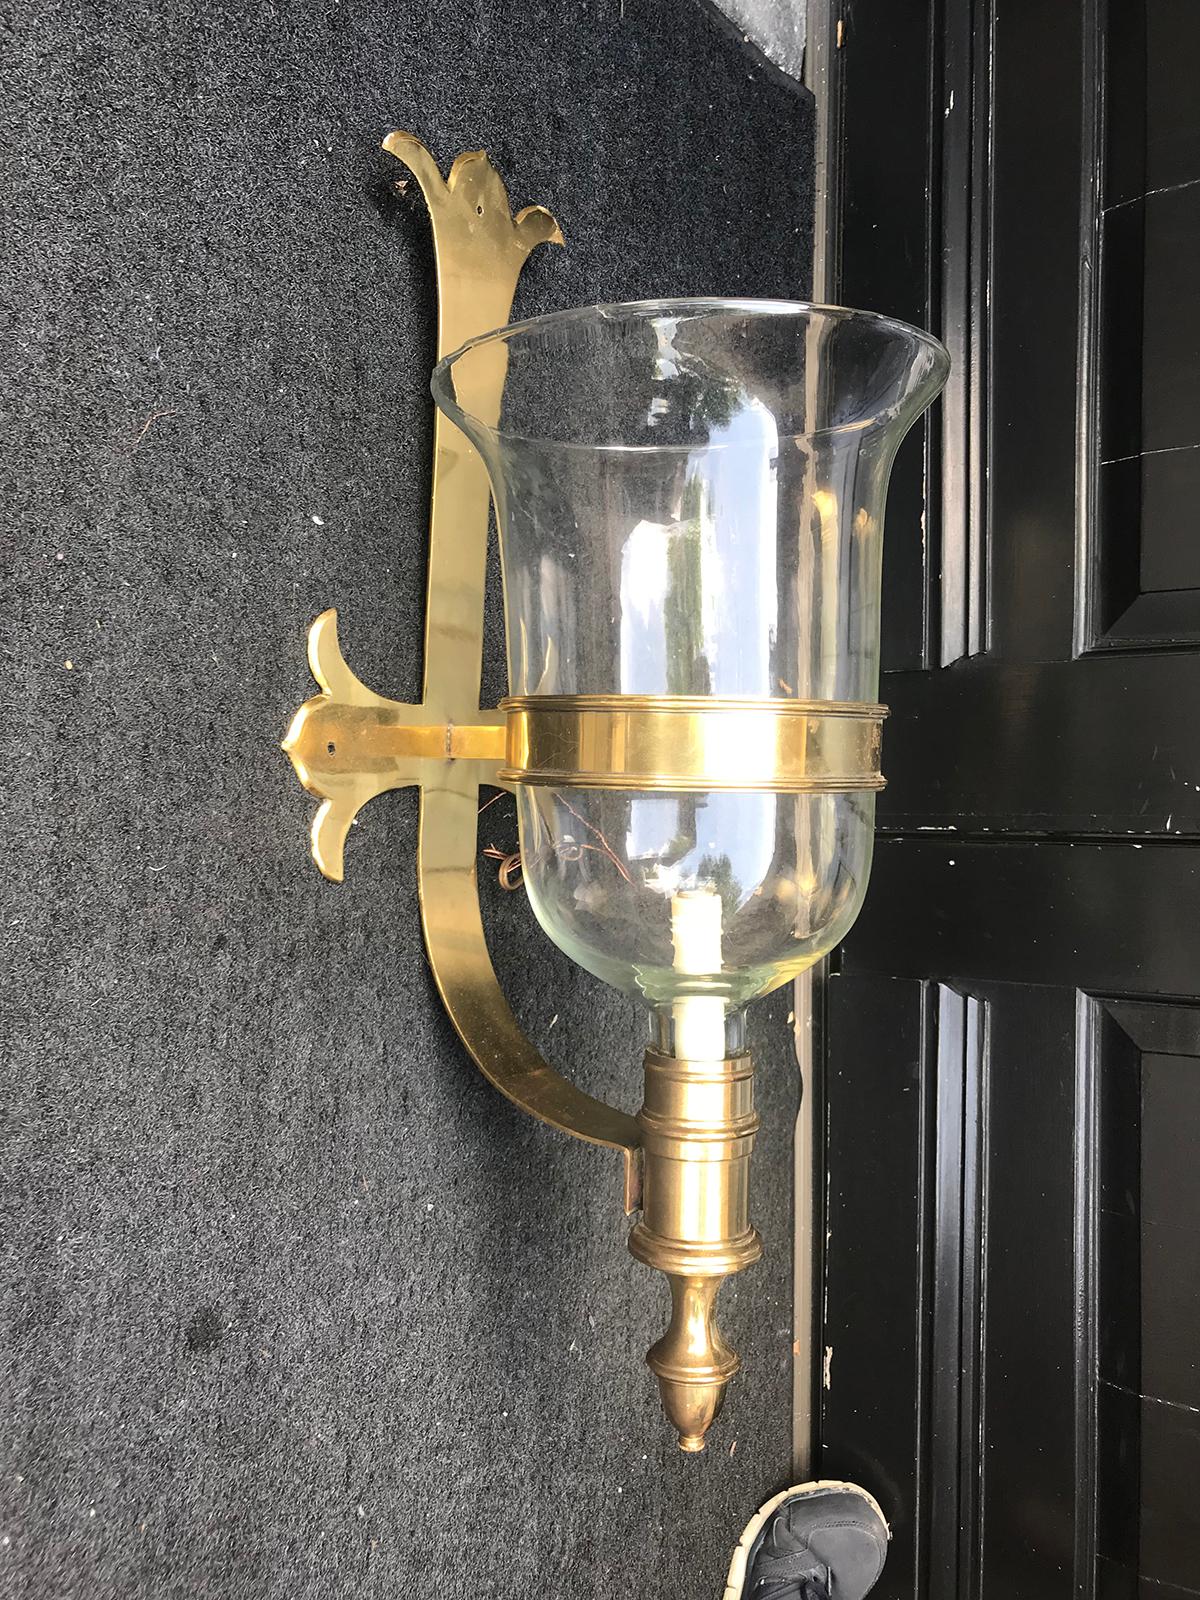 Pair of brass and glass Chapman Hurricane sconces, circa 1970s
Brand new wiring.